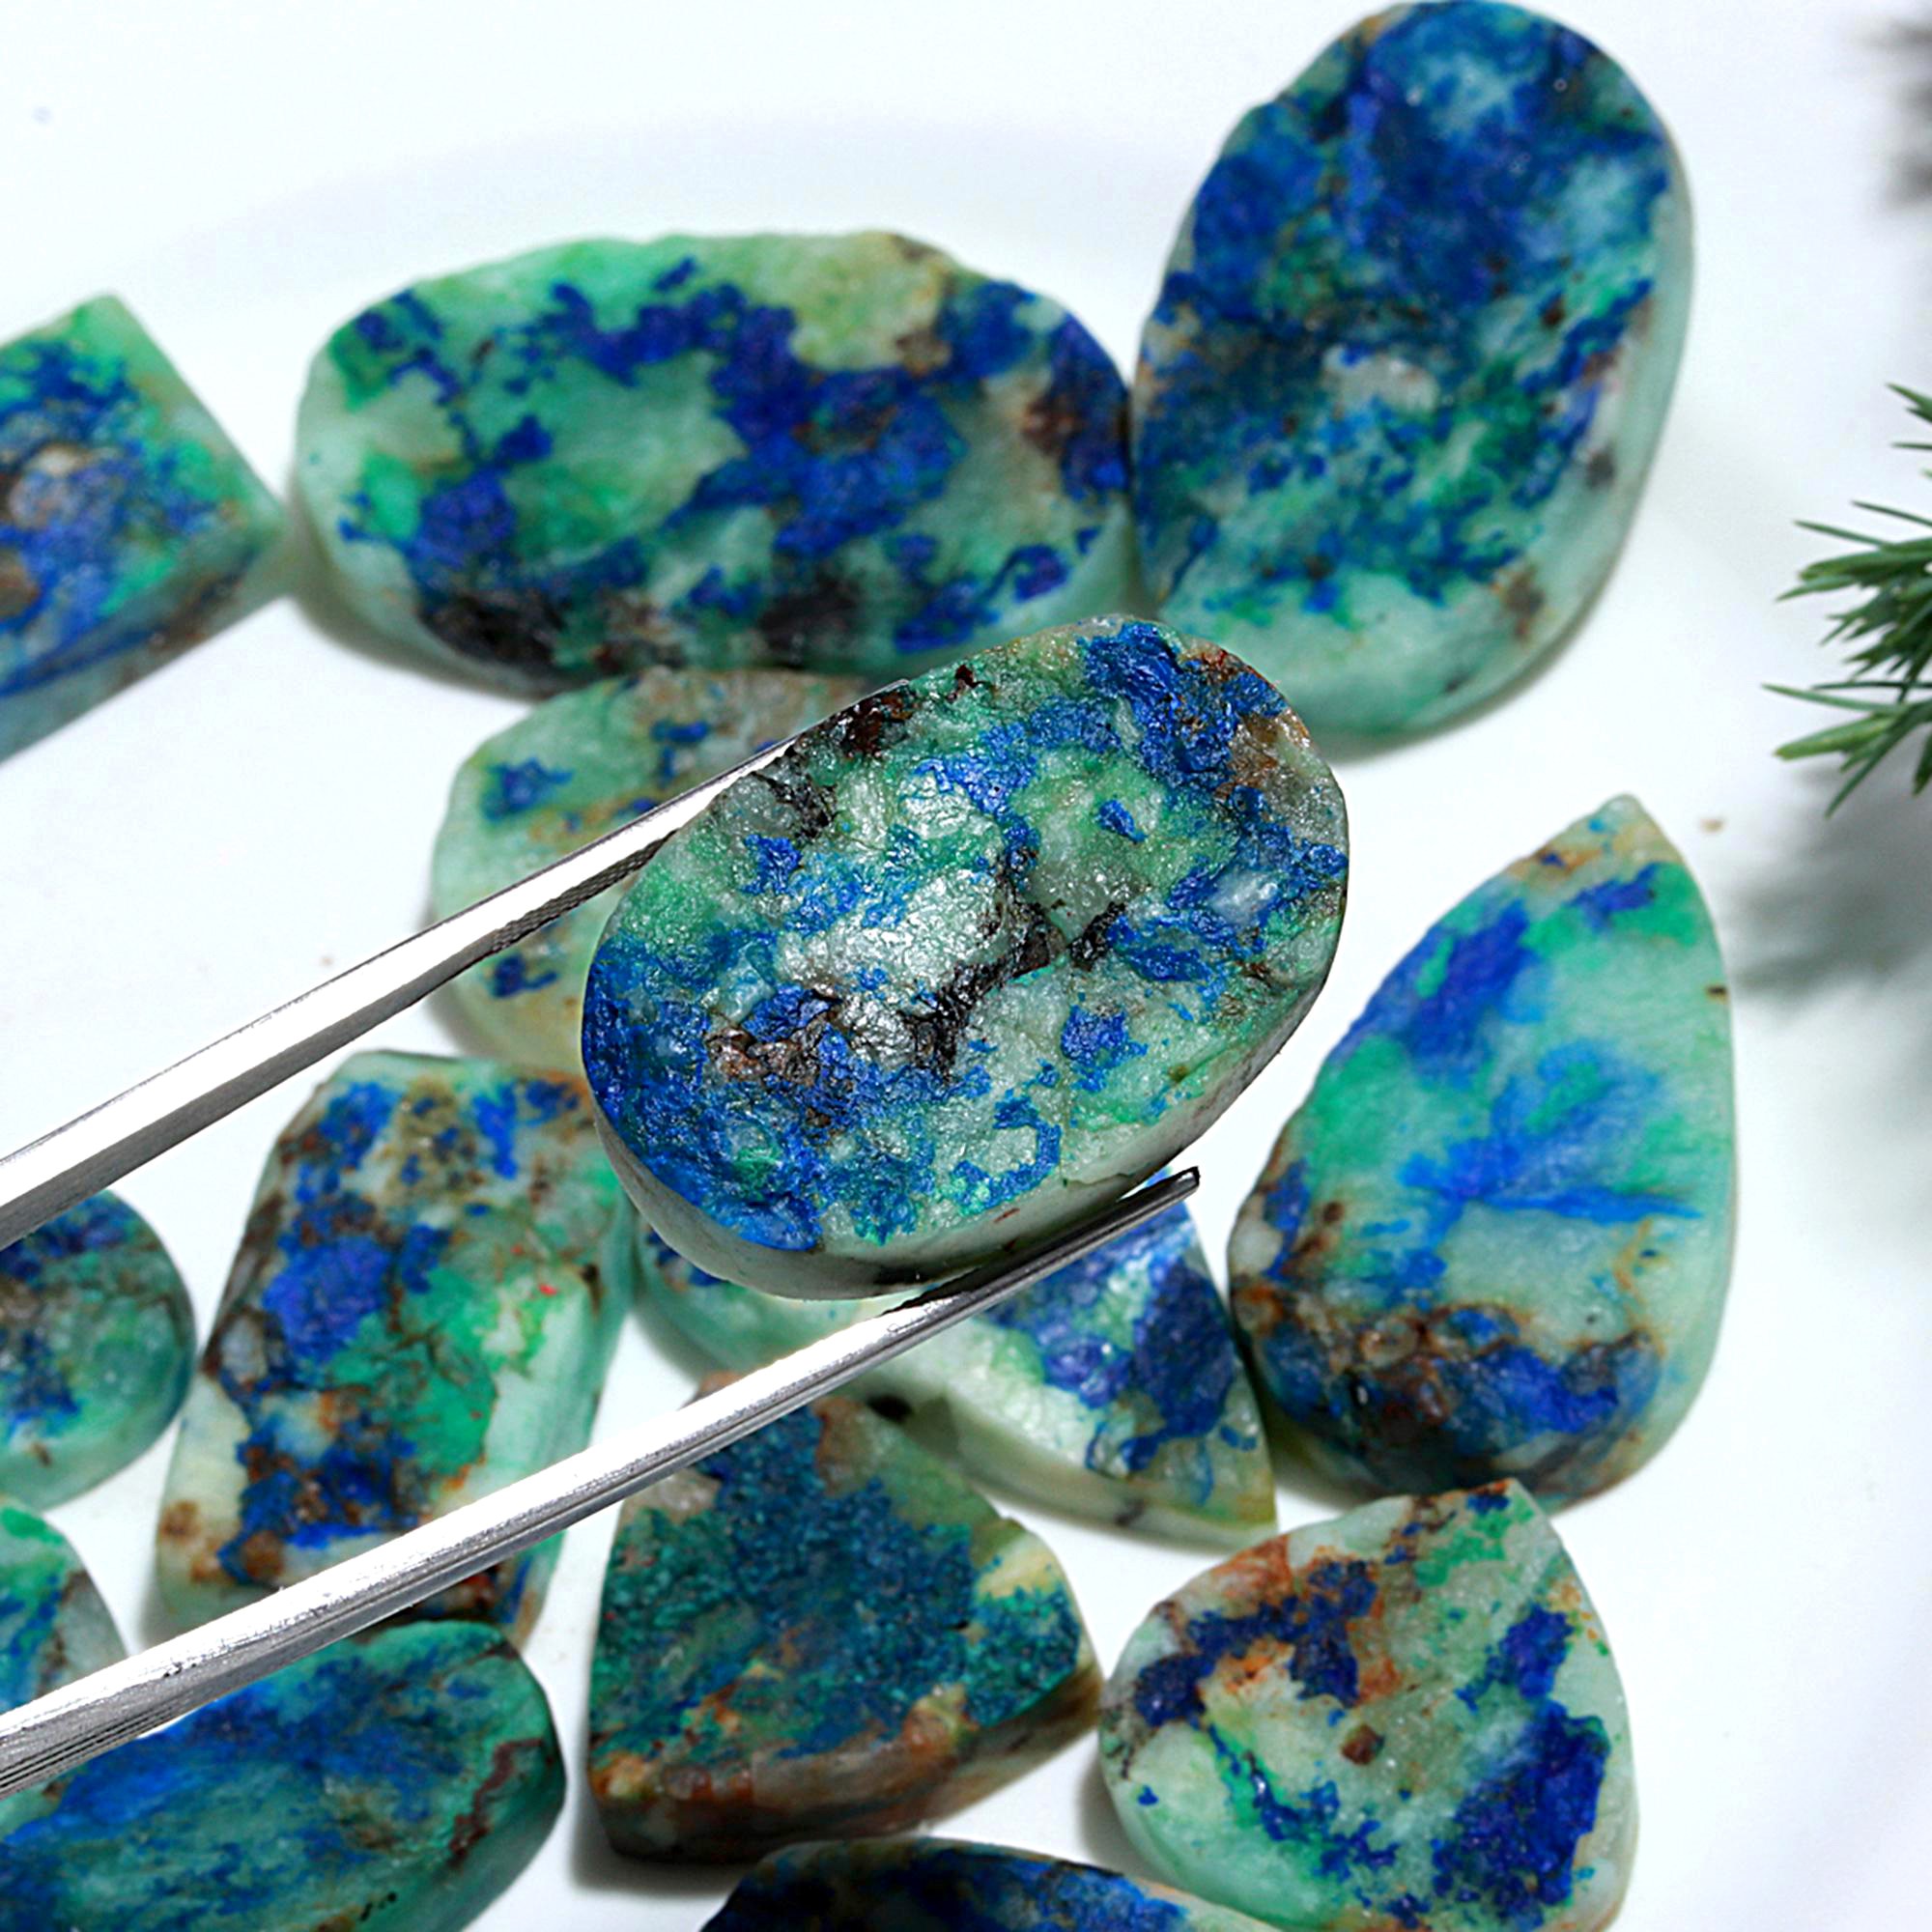 17 Pcs 582.Cts Natural Azurite Druzy Unpolished Loose Cabochon Gemstone For Jewelry Wholesale Lot Size 40x25 22x23mm